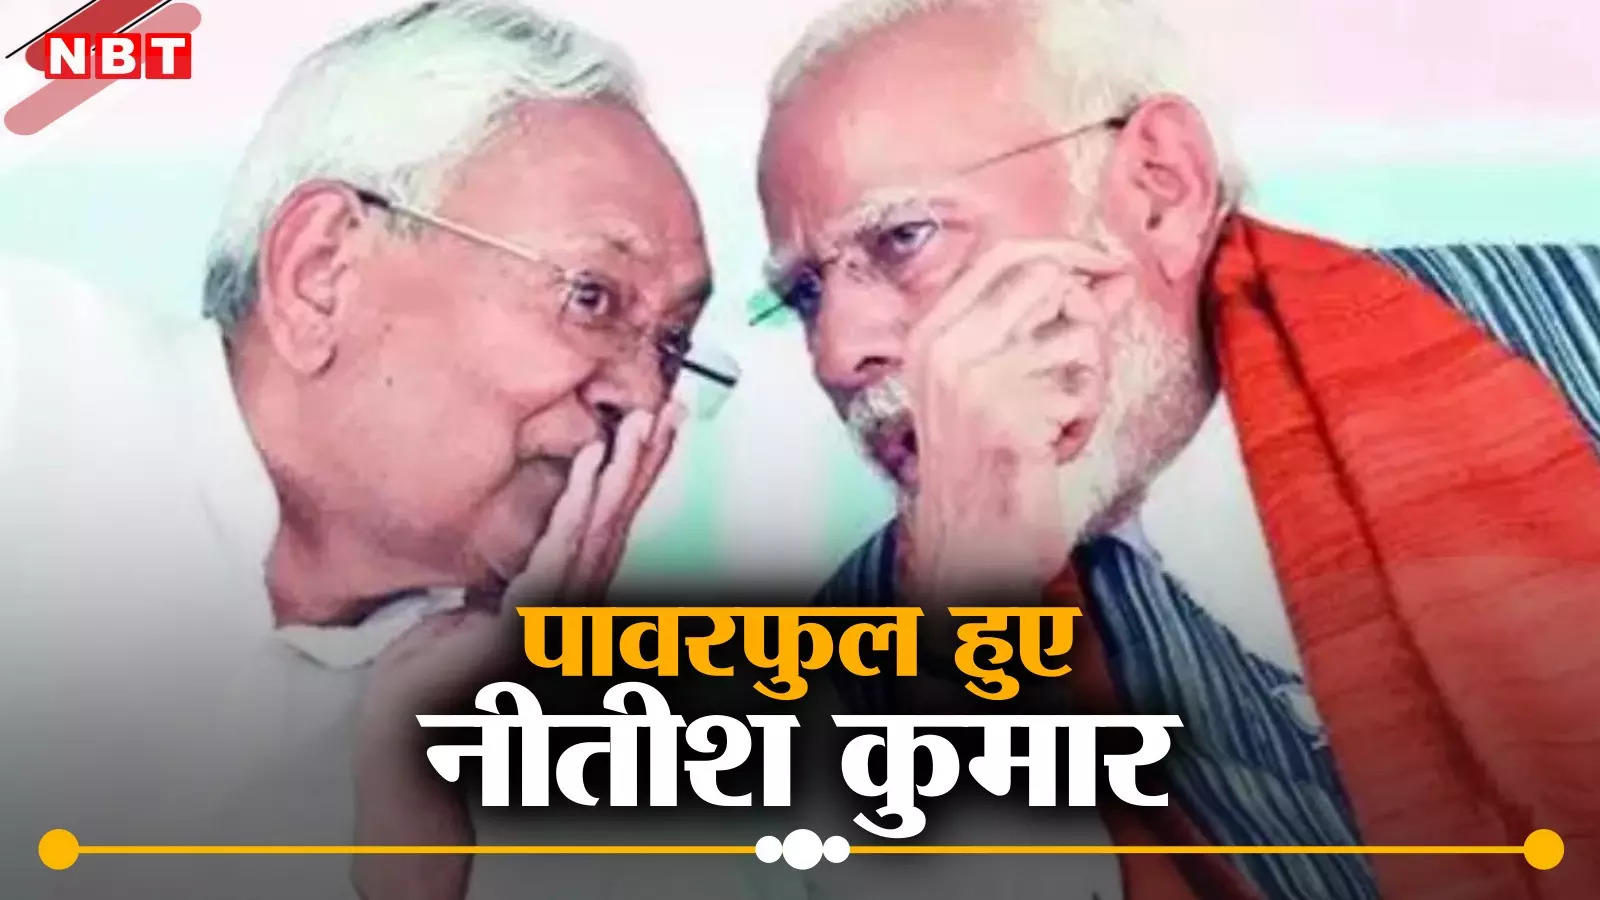 Nitish belongs to everyone… Why is BJP giving so much importance to the Chief Minister of Bihar?